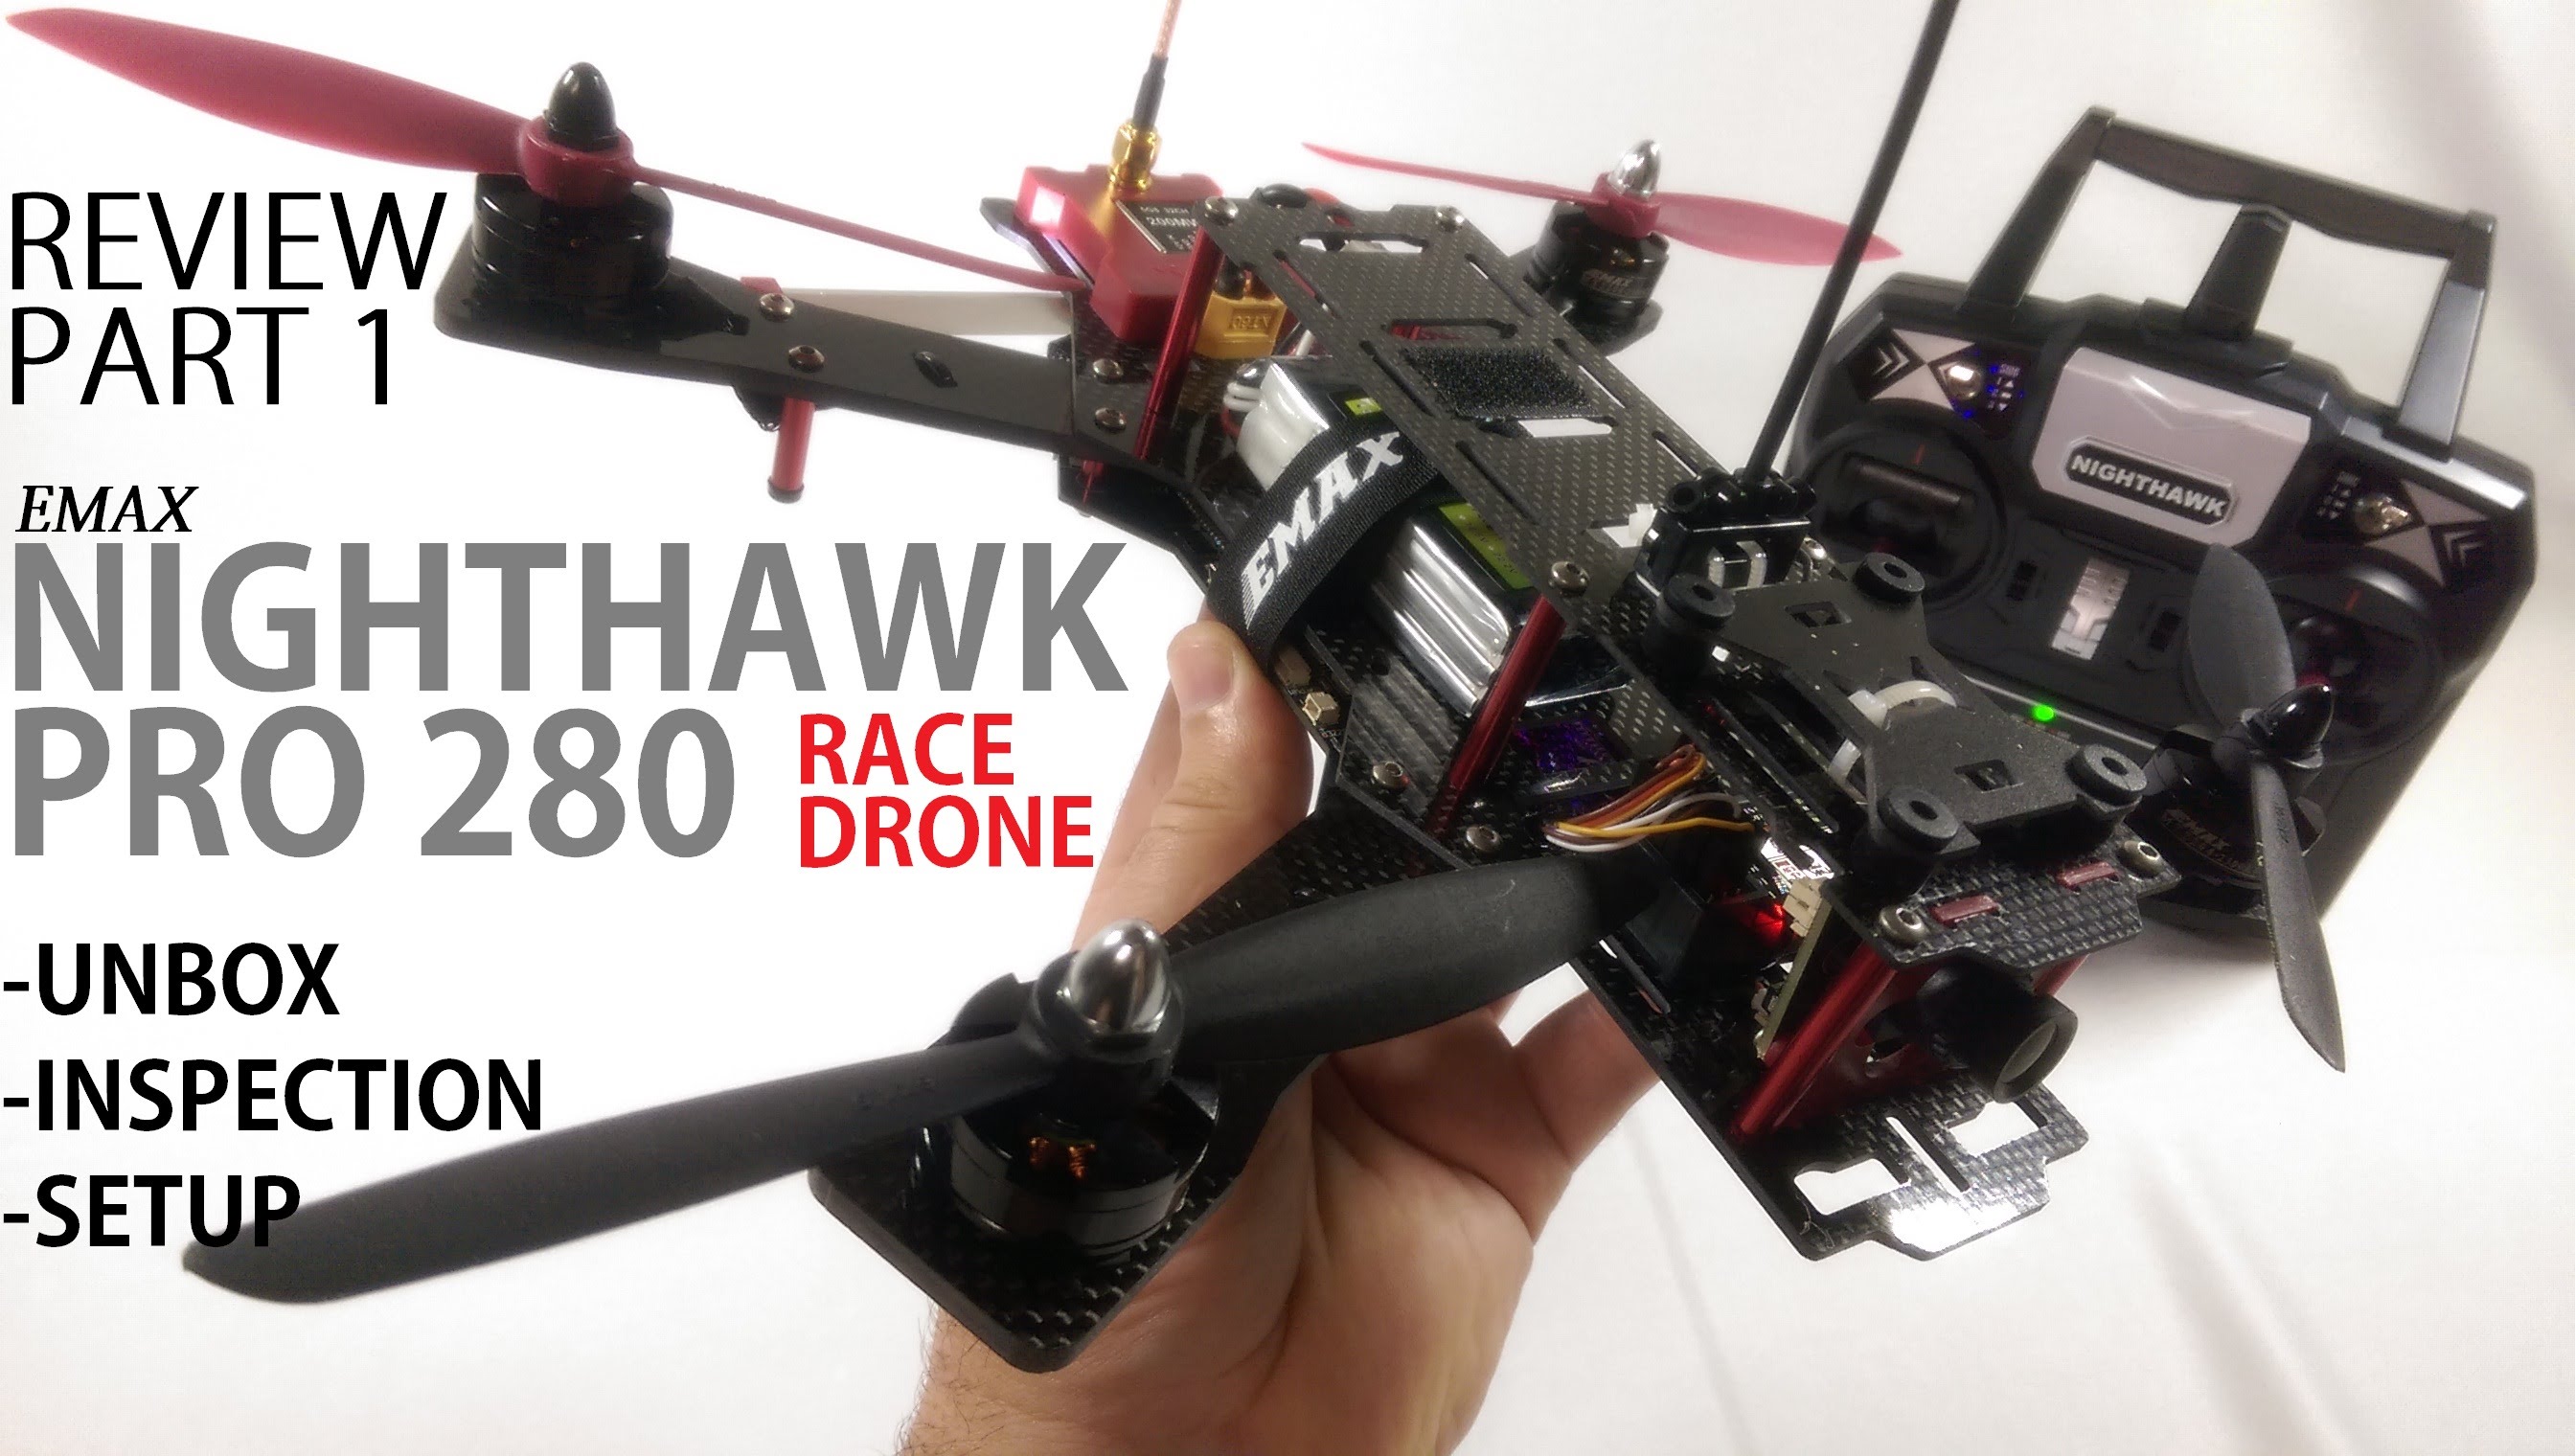 EMAX NightHawk PRO 280 FPV Race Drone Review – Part 1 [UnBox, Inspection, Setup]